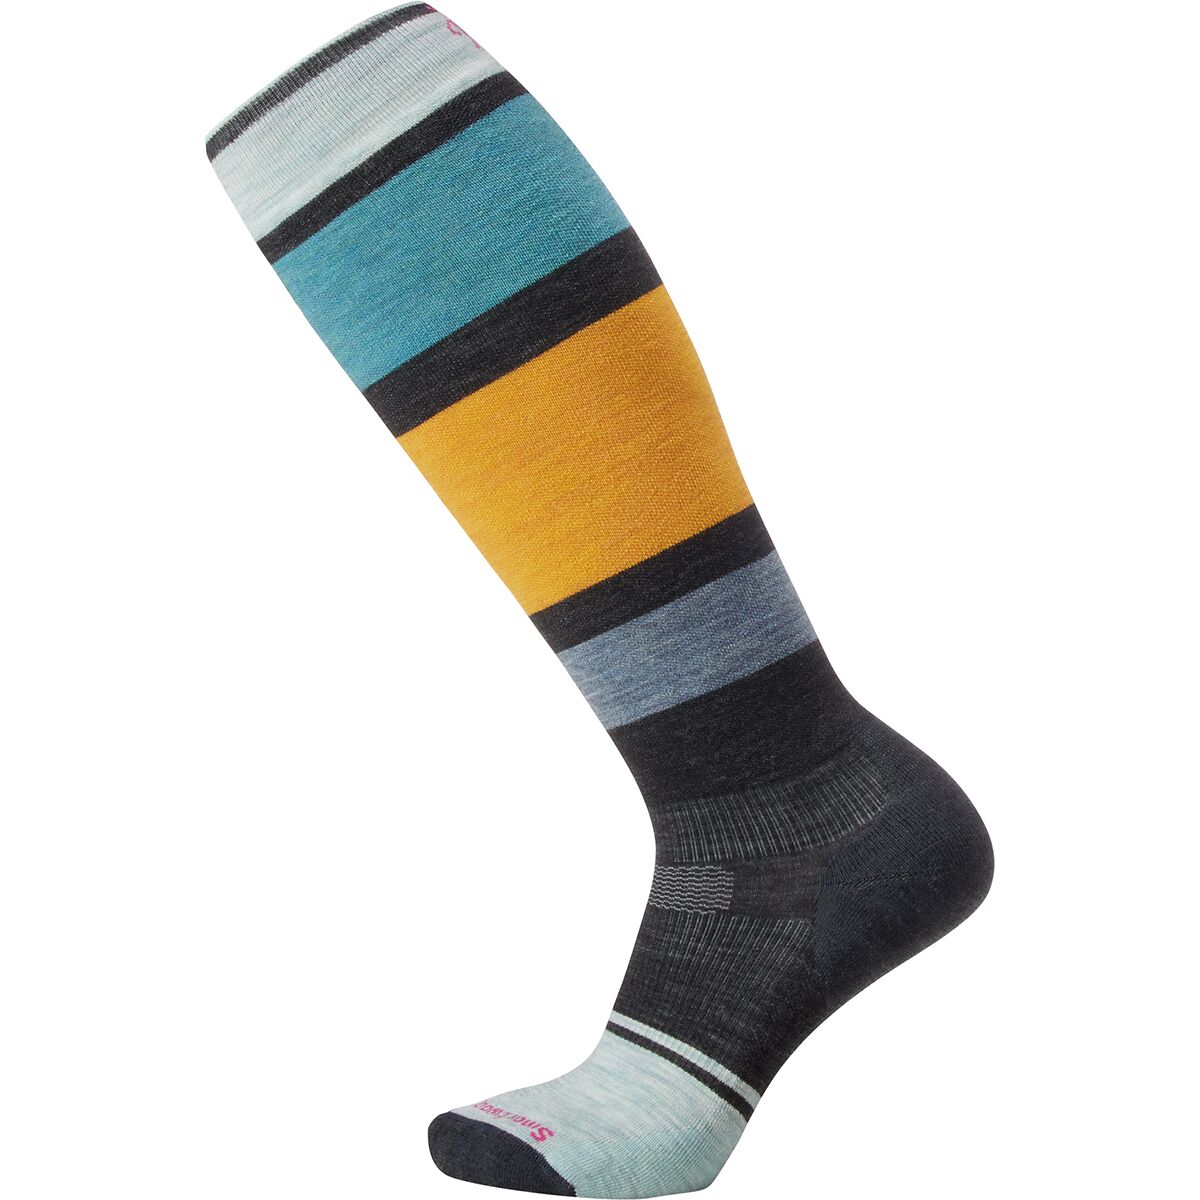 Smartwool Snowboard Targeted Cushion Extra Stretch OTC Sock - Women's